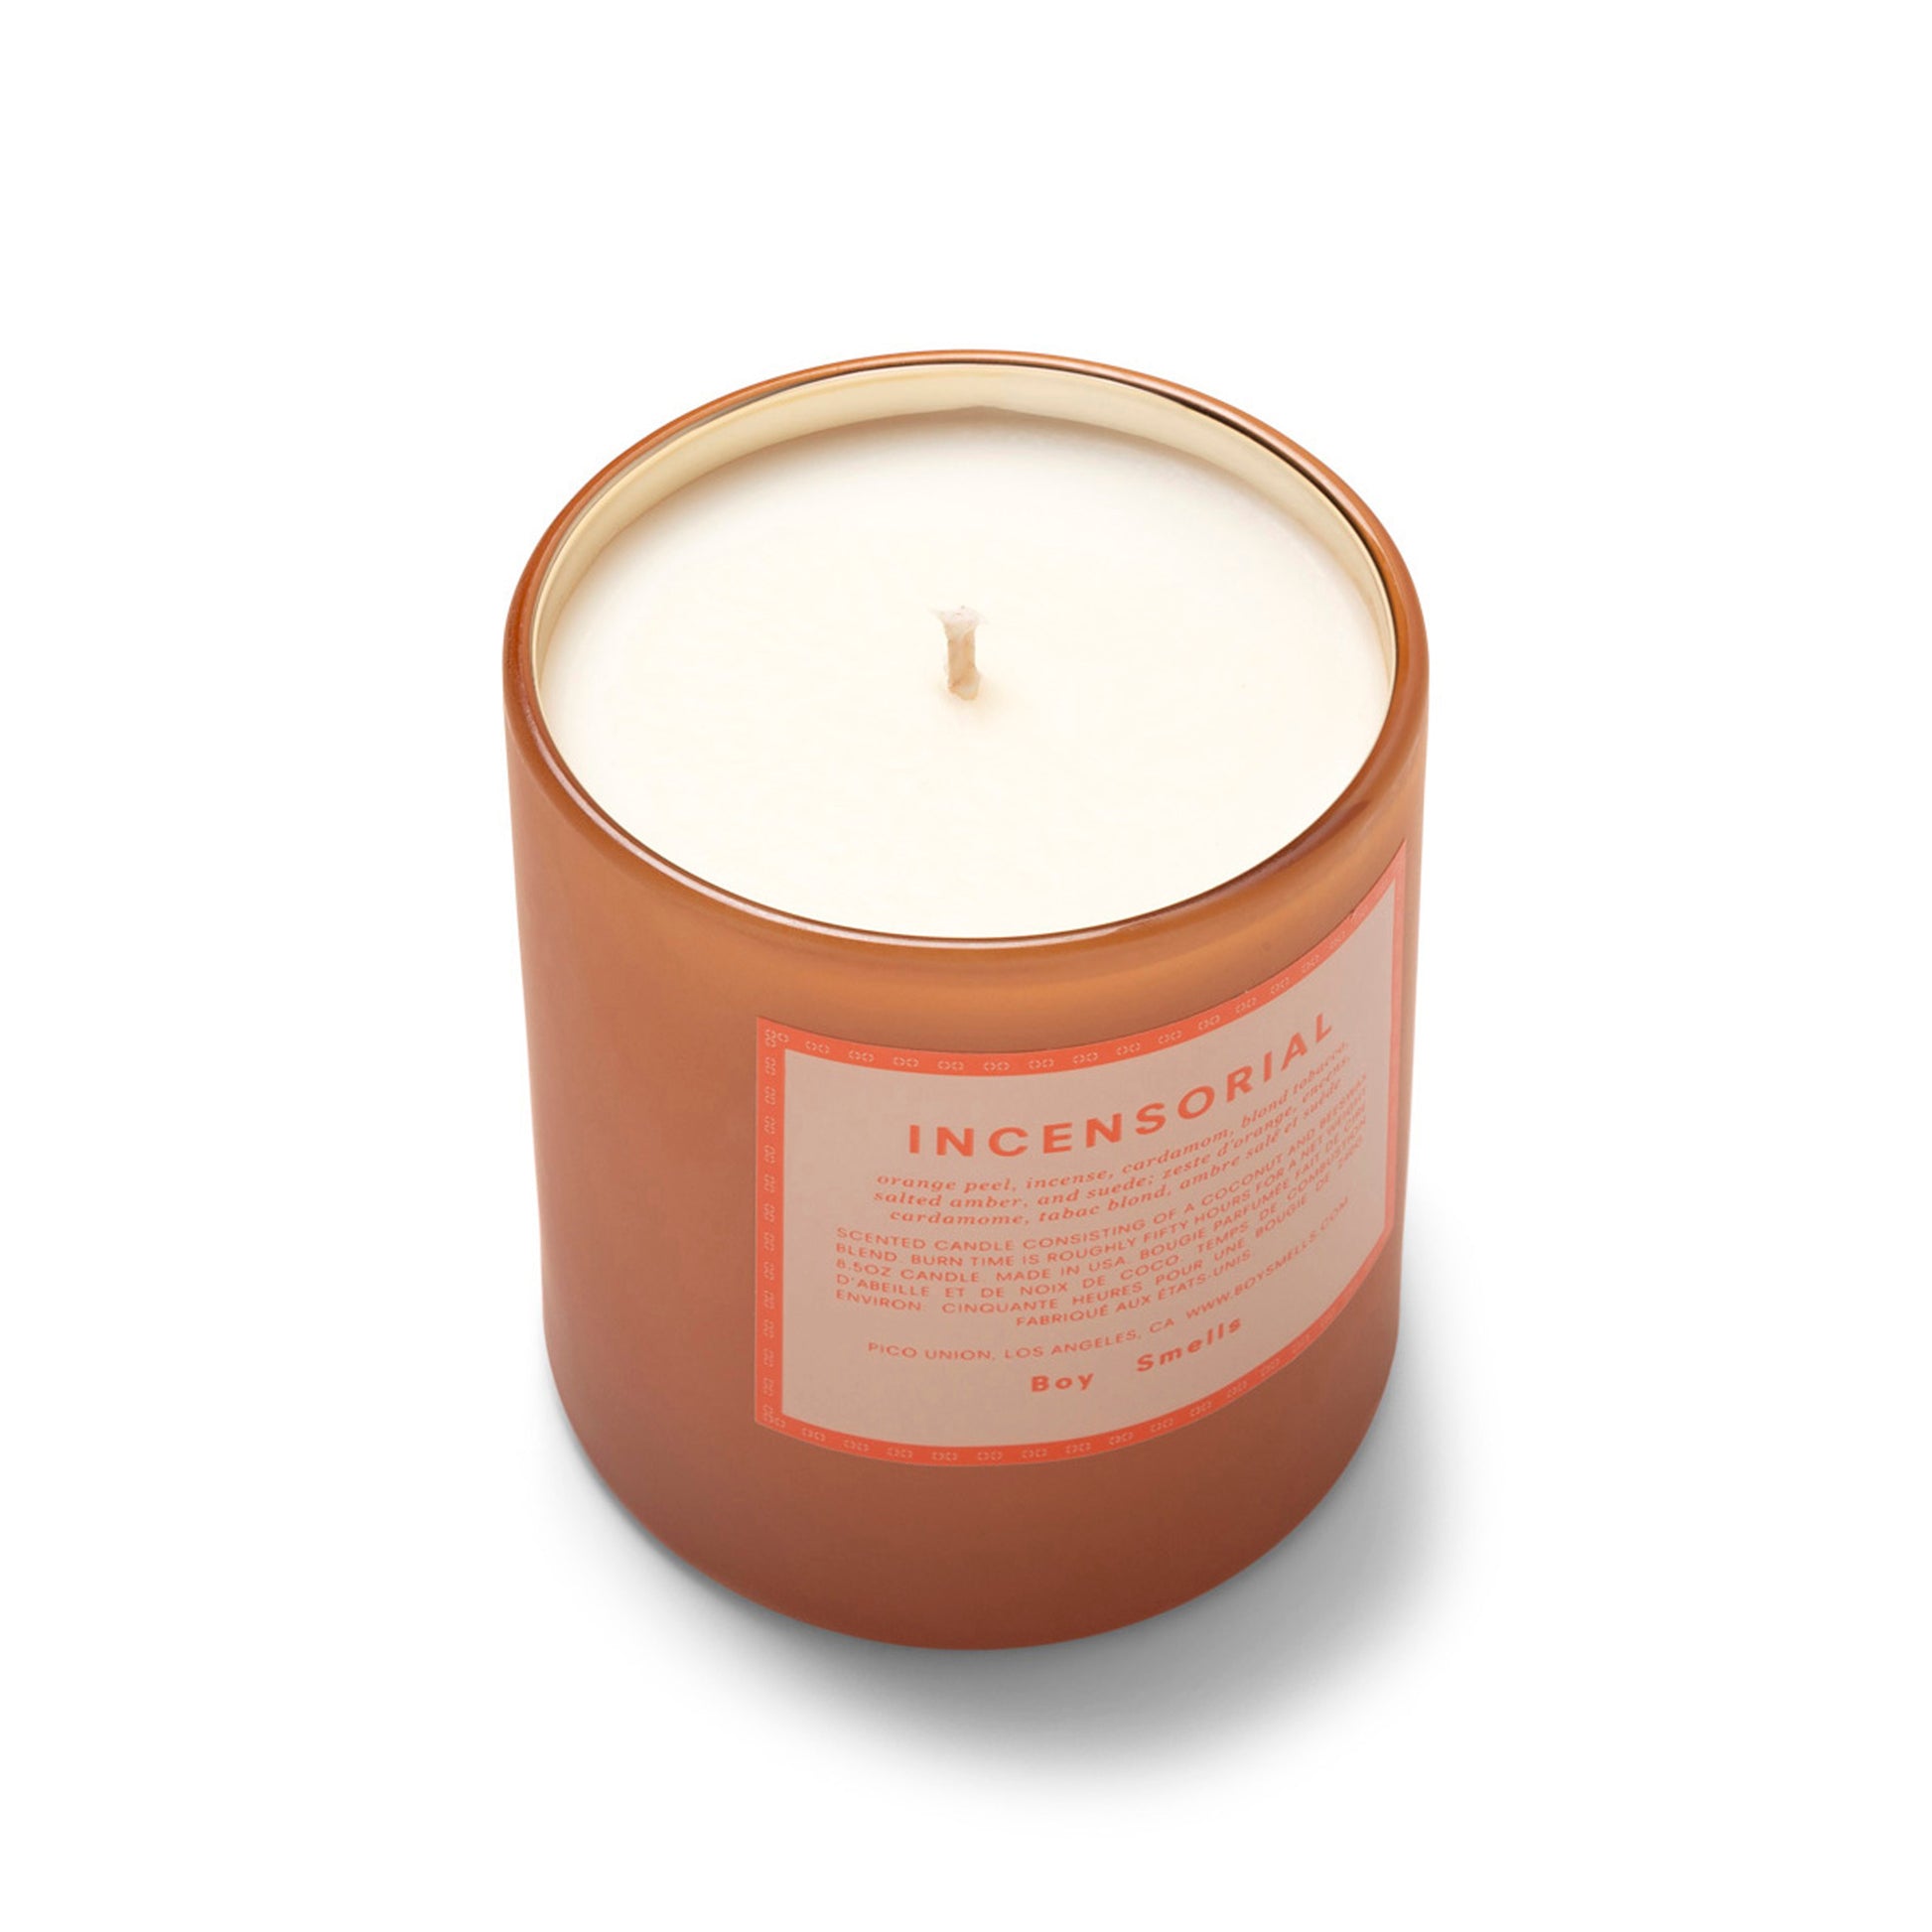 Boy Smells Home N/A / O/S INCENSORIAL CANDLE